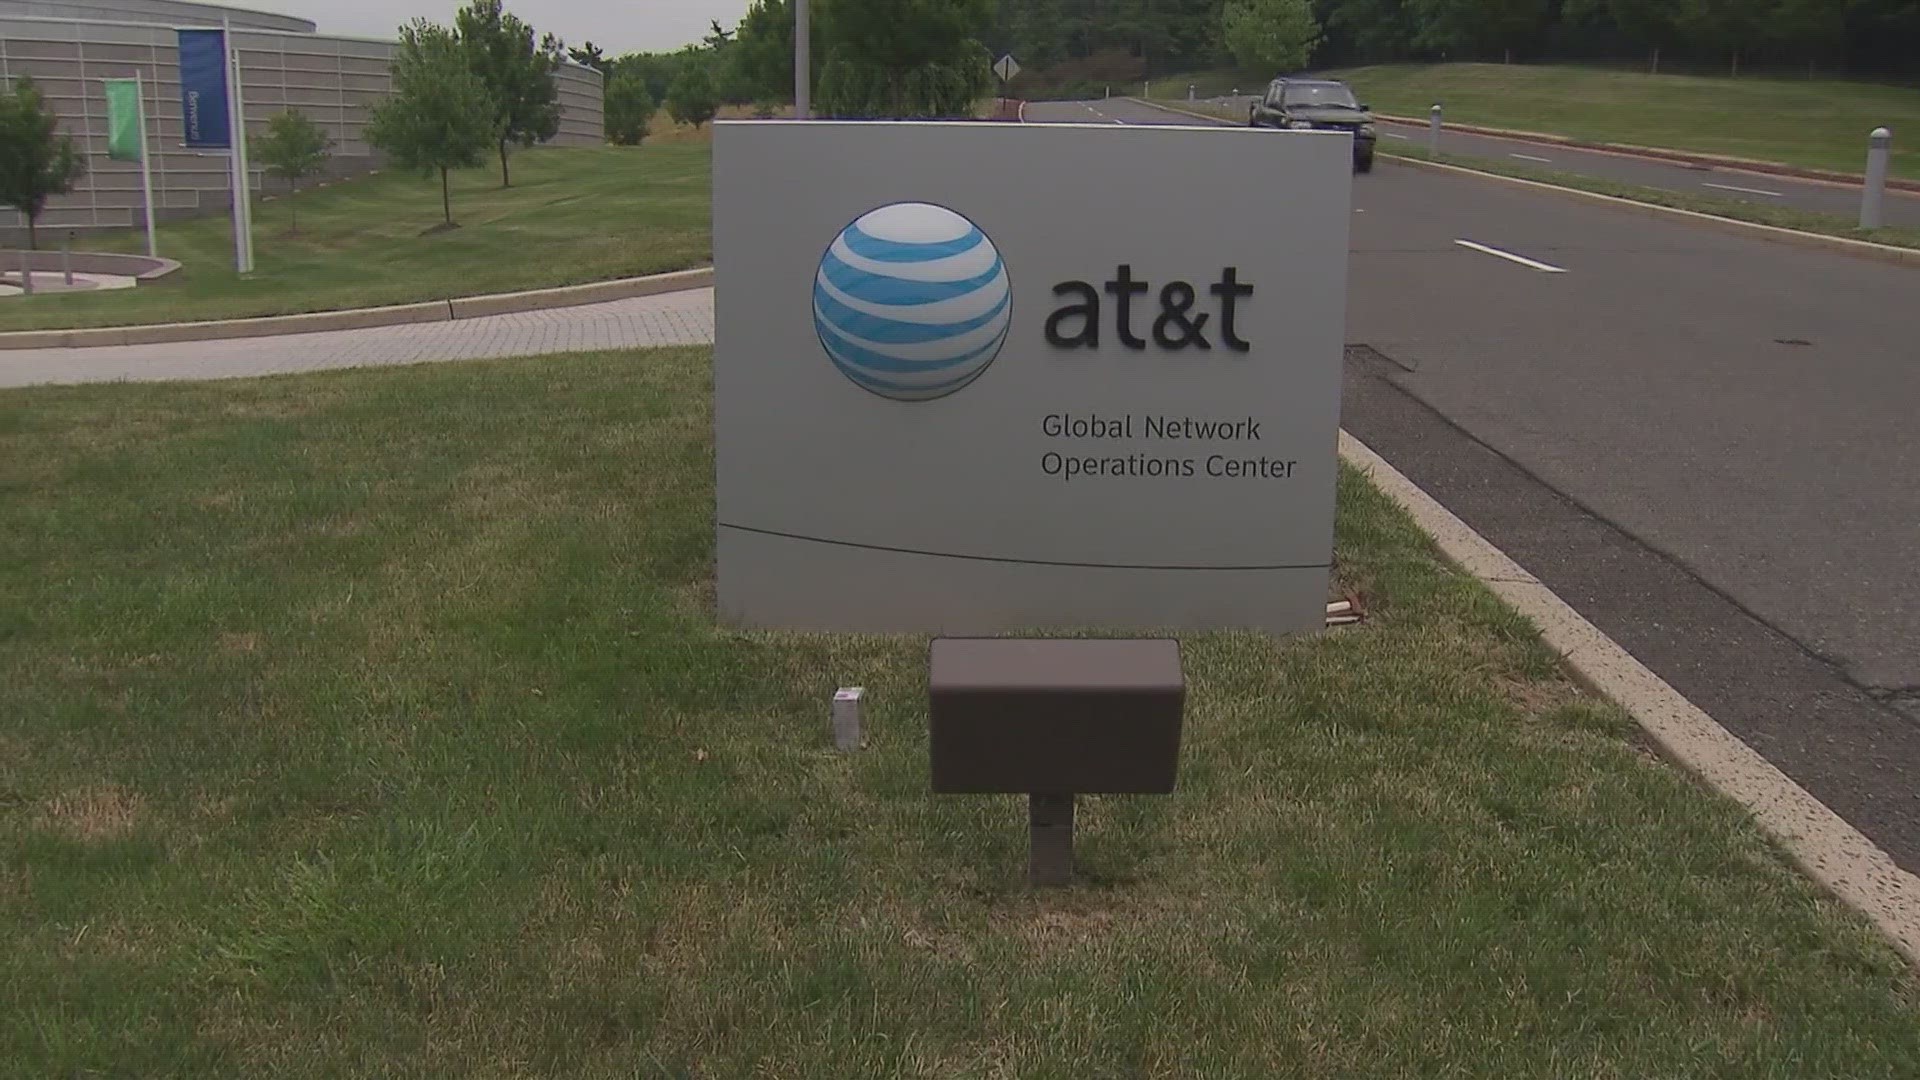 Thousands of AT&T's cellular customers were left without service Thursday because of a massive reported outage across the U.S., leaving them unable to place calls.